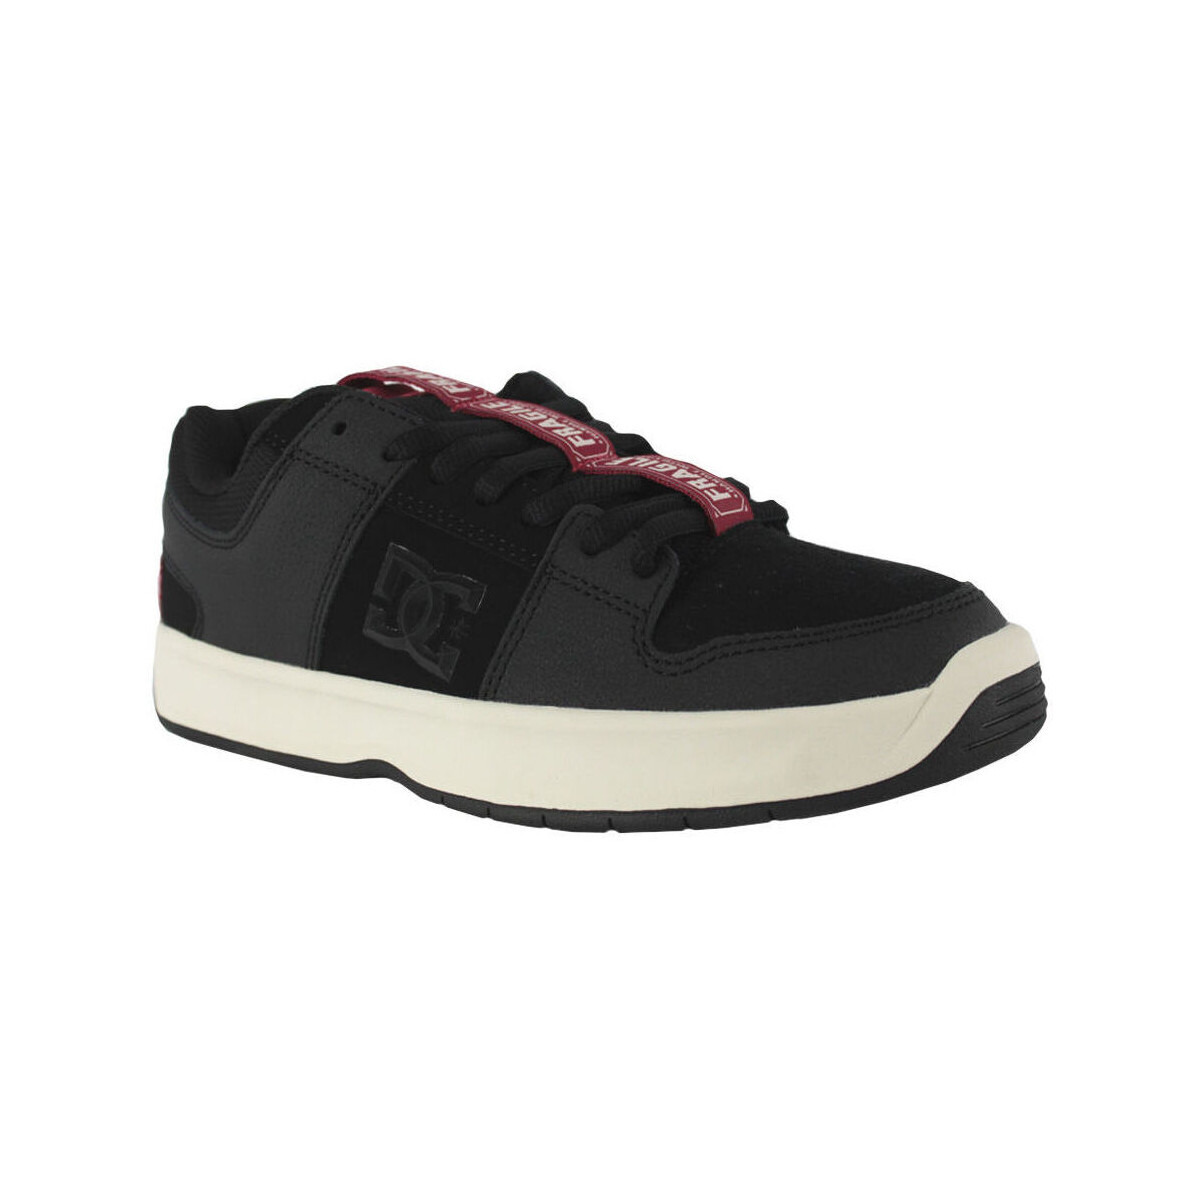 Spartoo Black Sneakers for Man by Dc Shoes GOOFASH